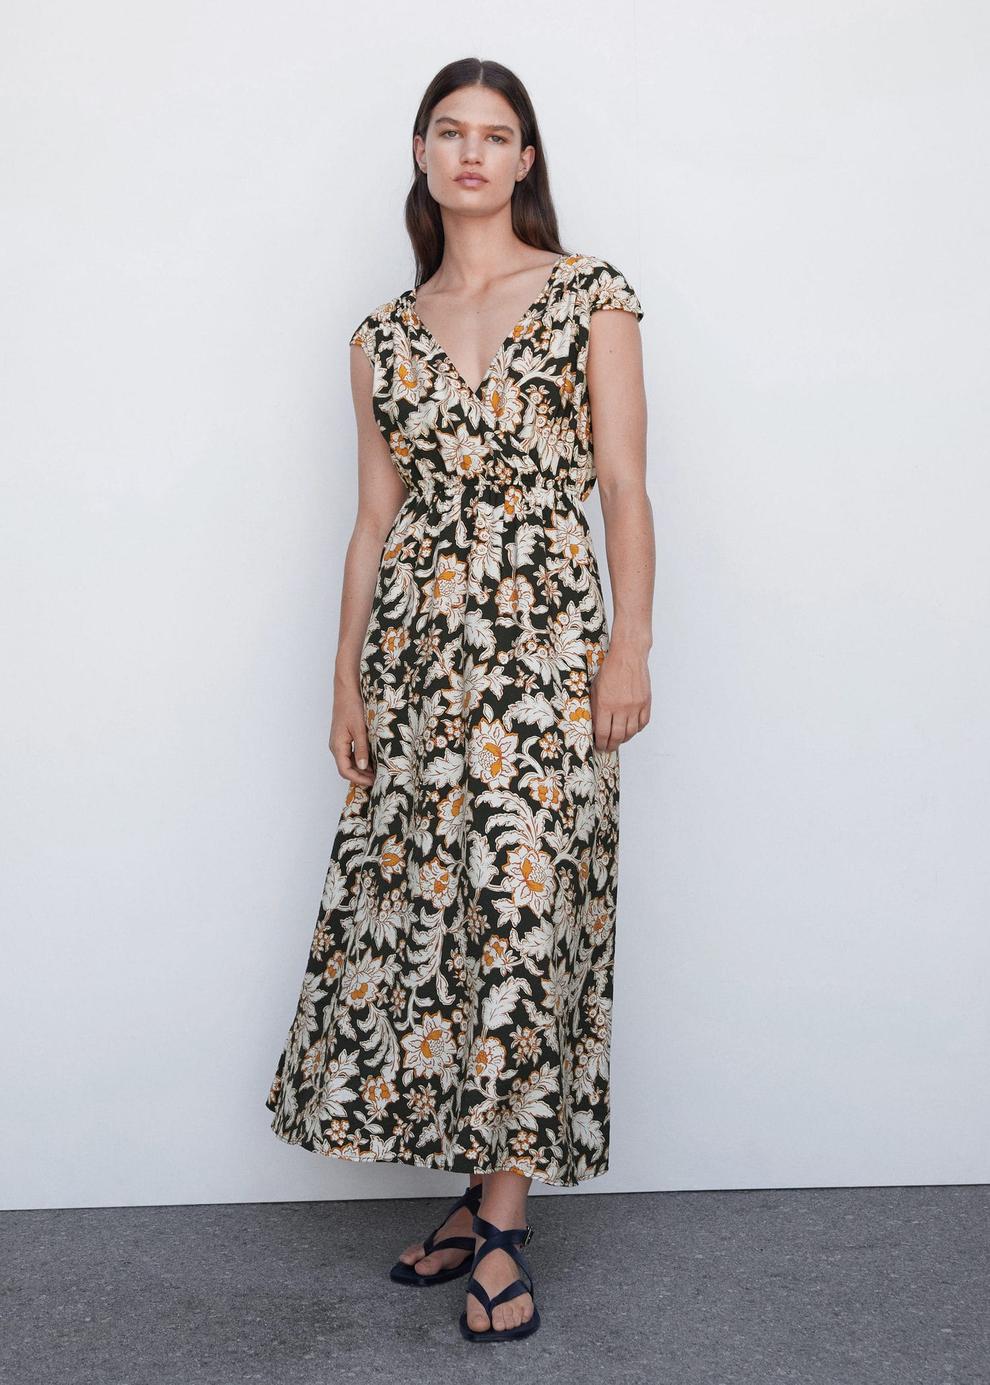 Floral wrap neckline dress offers at $39.99 in Mango